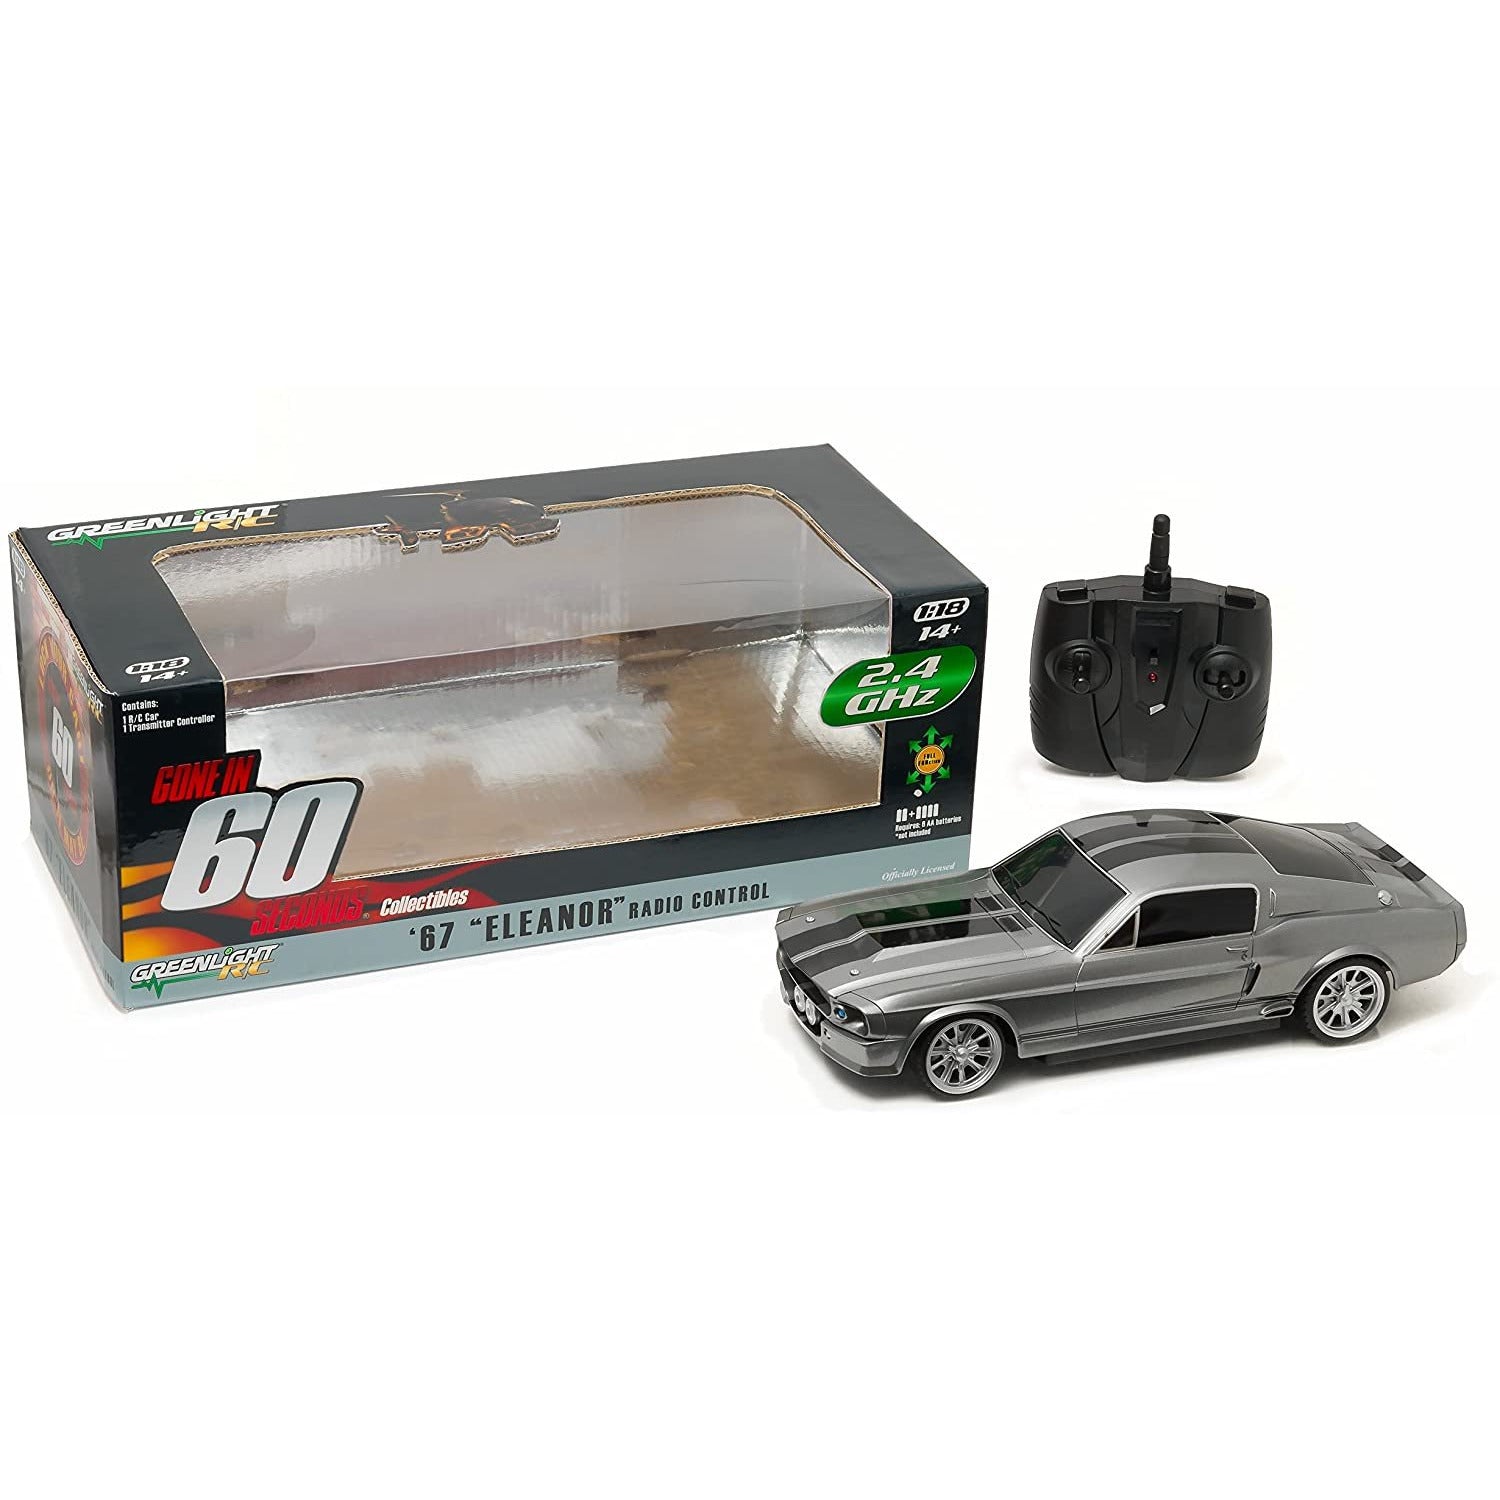 Greenlight 1/18 Gone In Sixty Seconds 1967 Ford Mustang Eleanor 2.4gHz RC